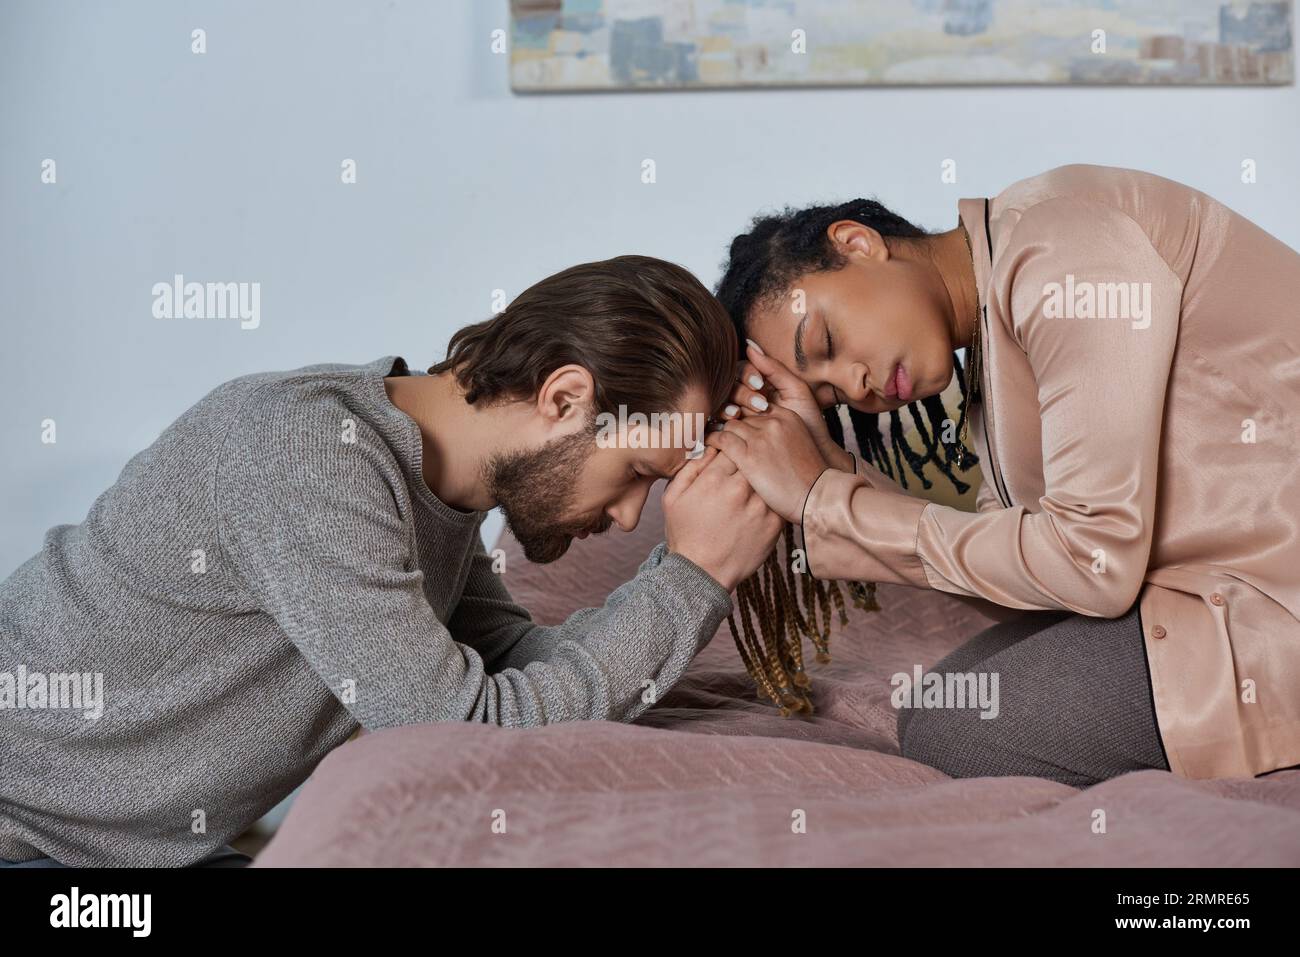 sad african american woman holding hands with man, worried multicultural couple bonding, empathy Stock Photo